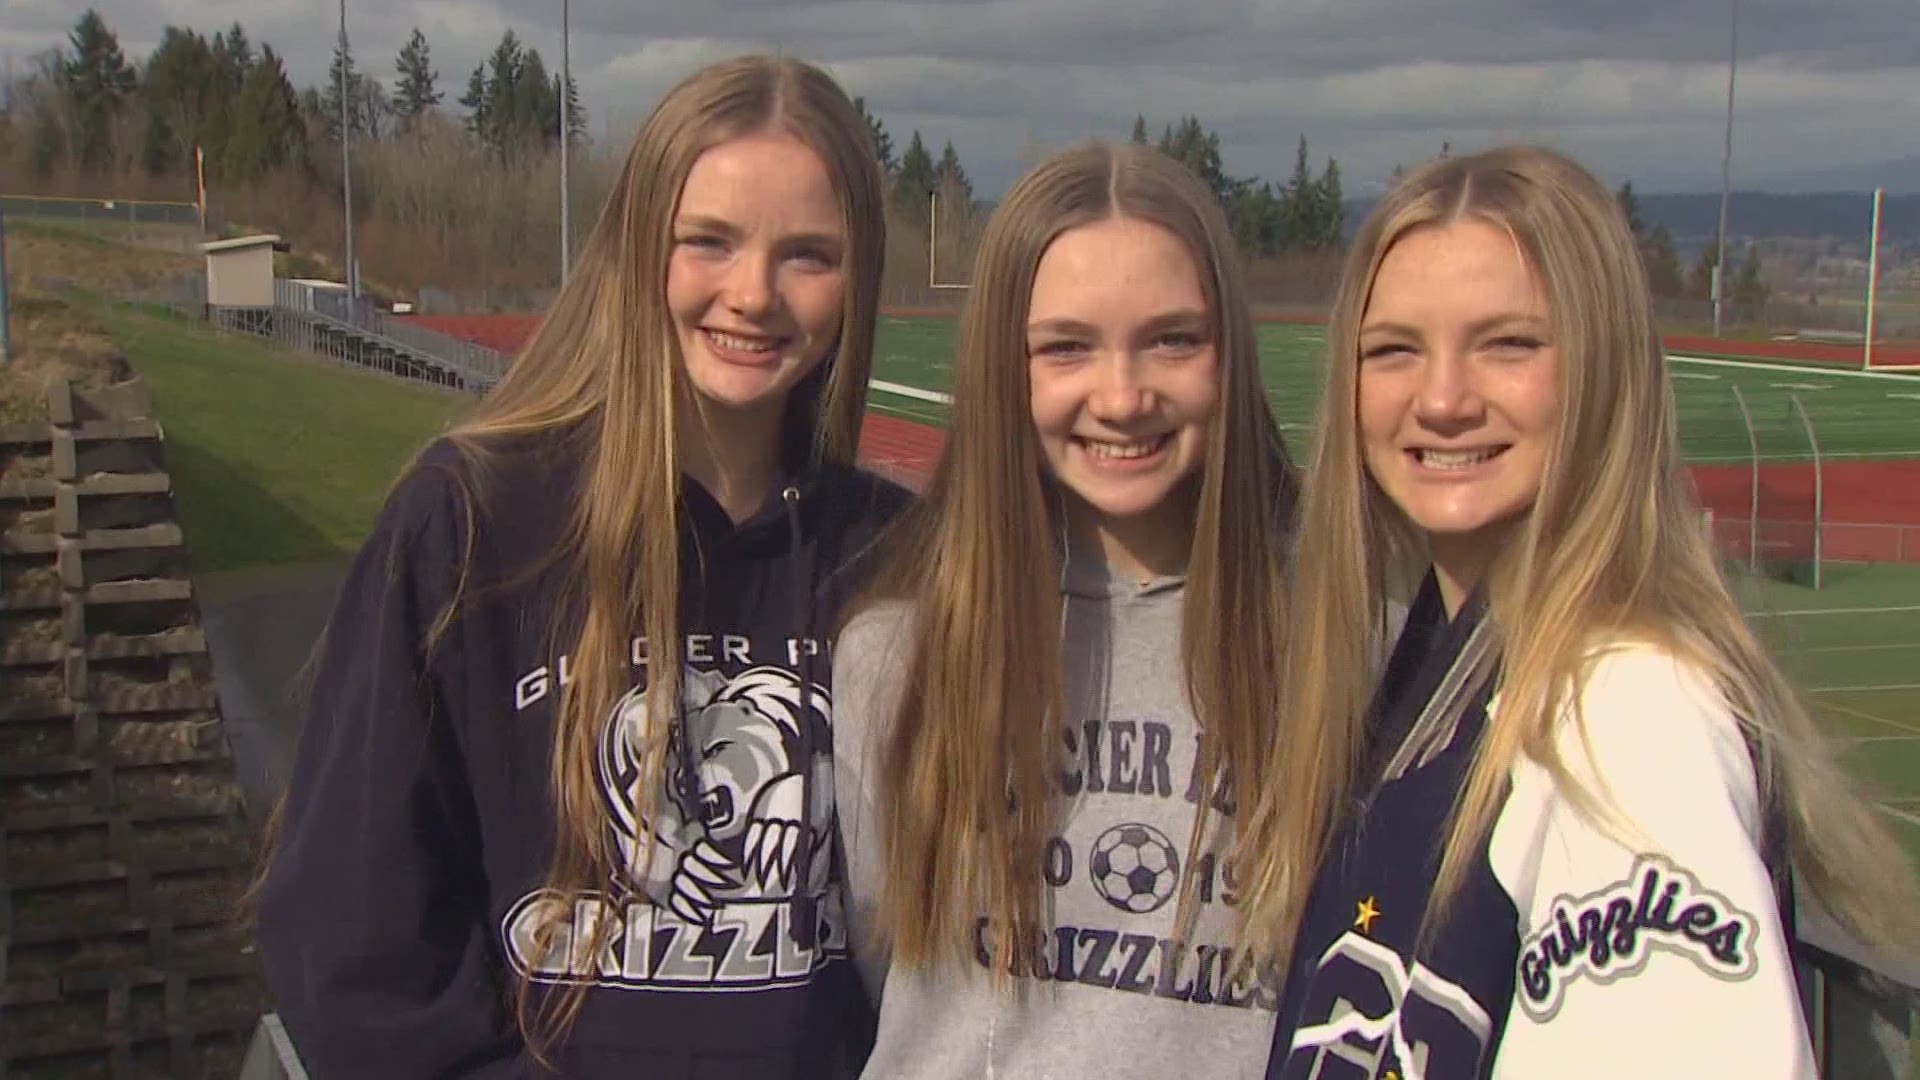 Getting back on the field for high school soccer has been extra special for the Seelhoff family from Snohomish.